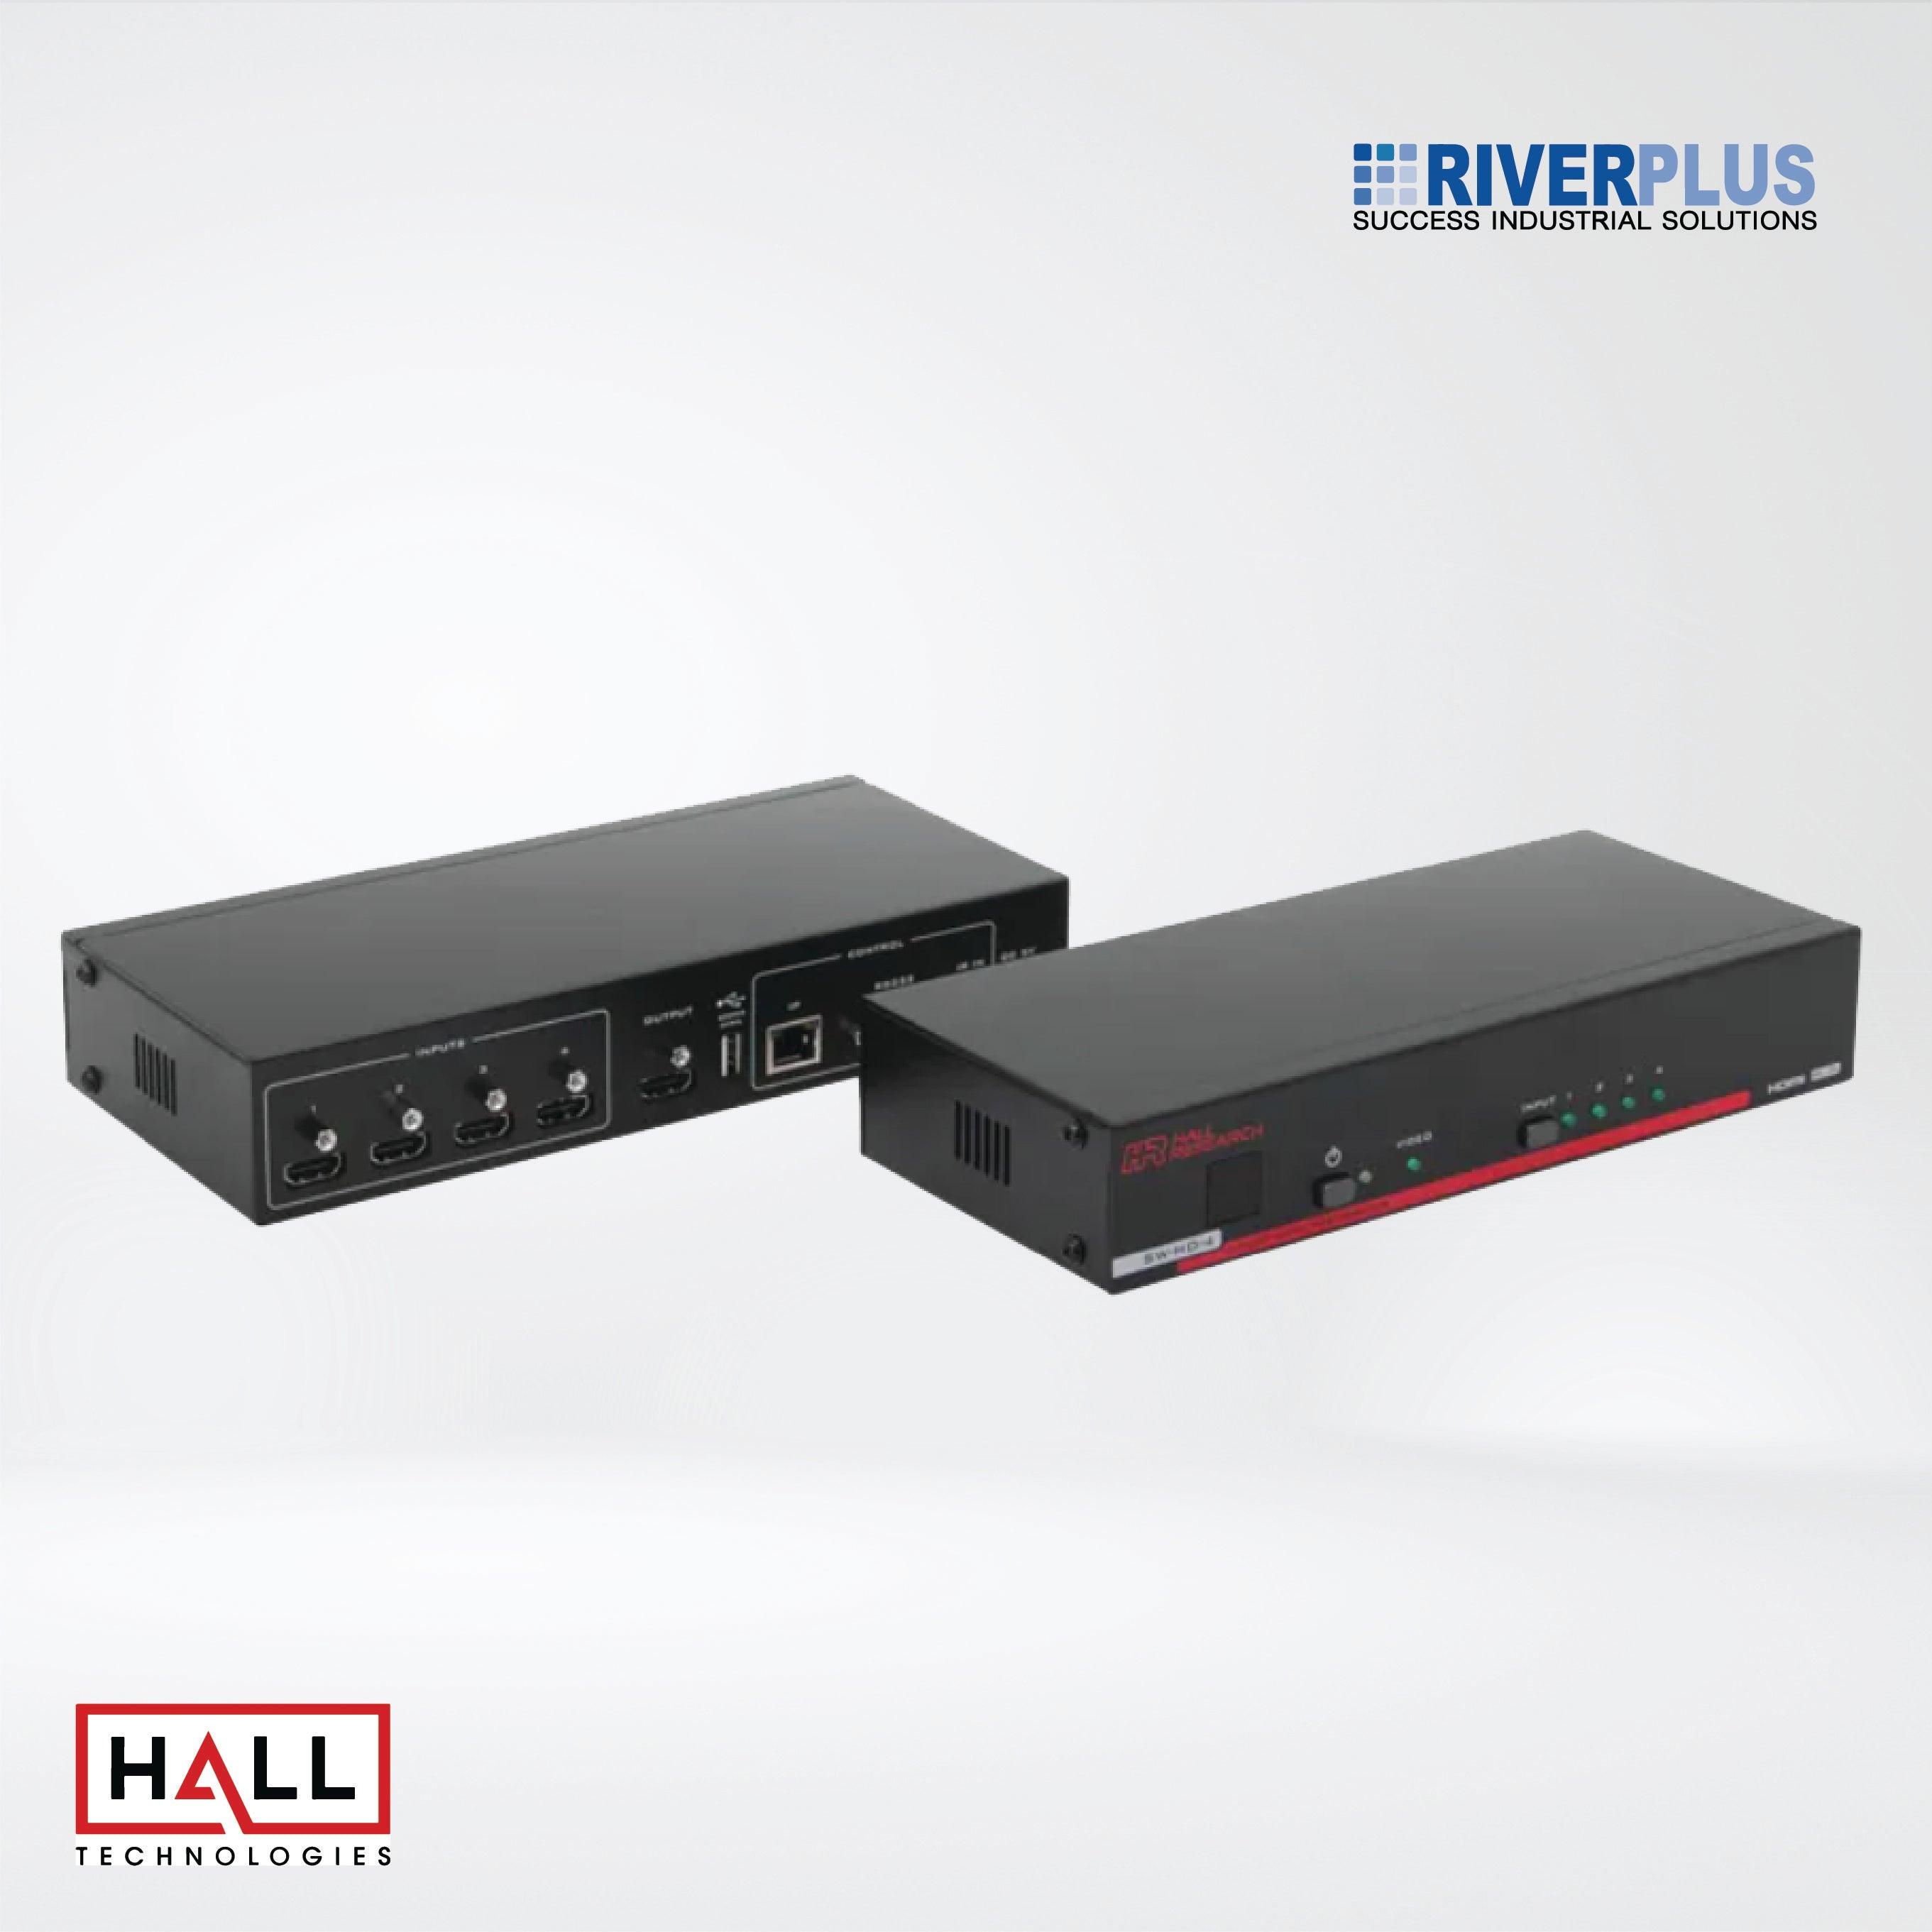 SW-HD-4 4-Port HDMI Fast Switch with IP, RS-232, and IR Control - Riverplus